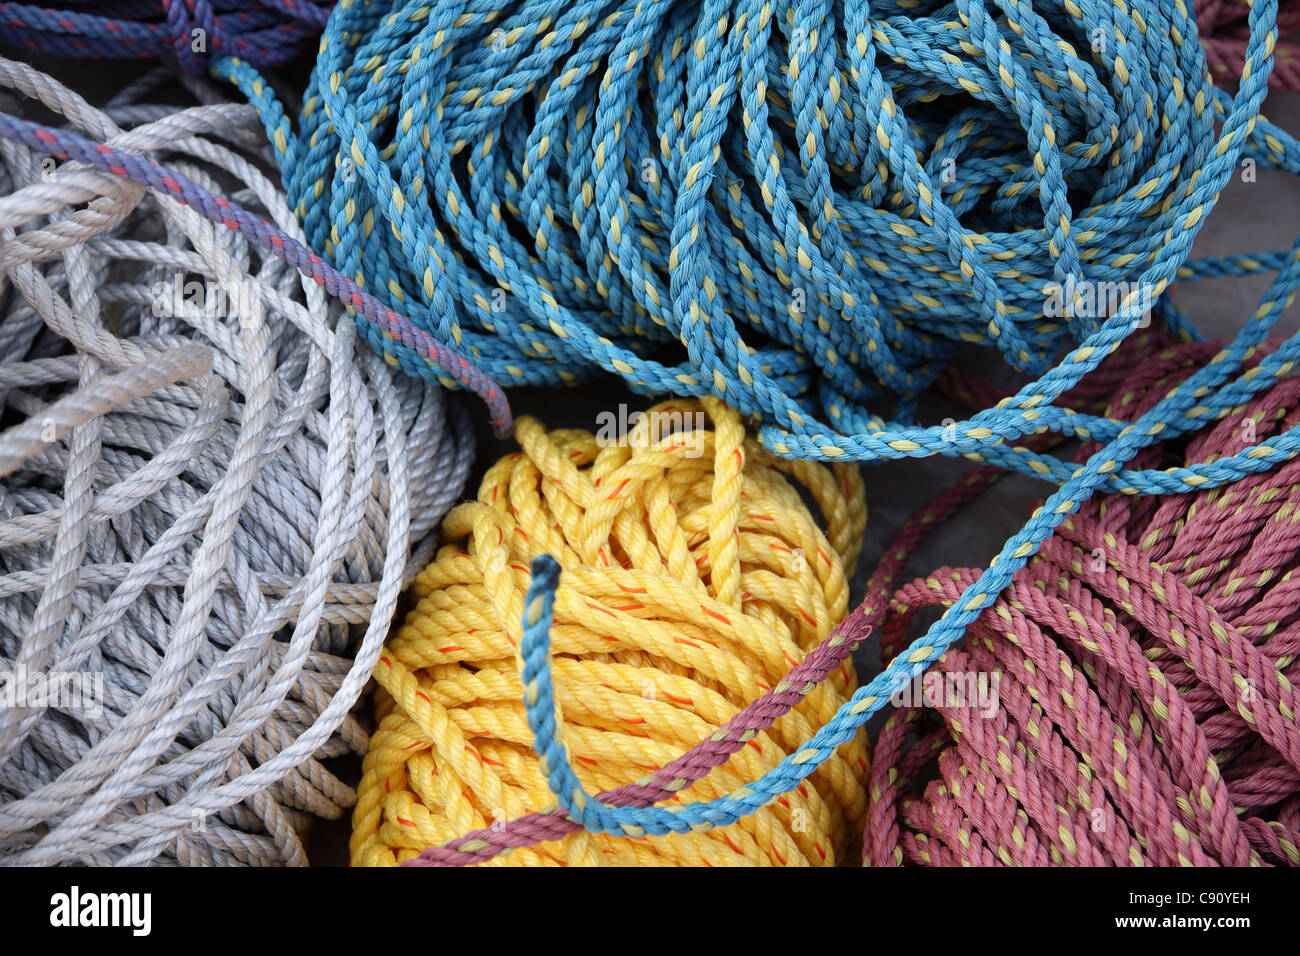 there is a long history of growing jute plants and manaufacture of rope in India. Rope can be dyed many colours. Stock Photo